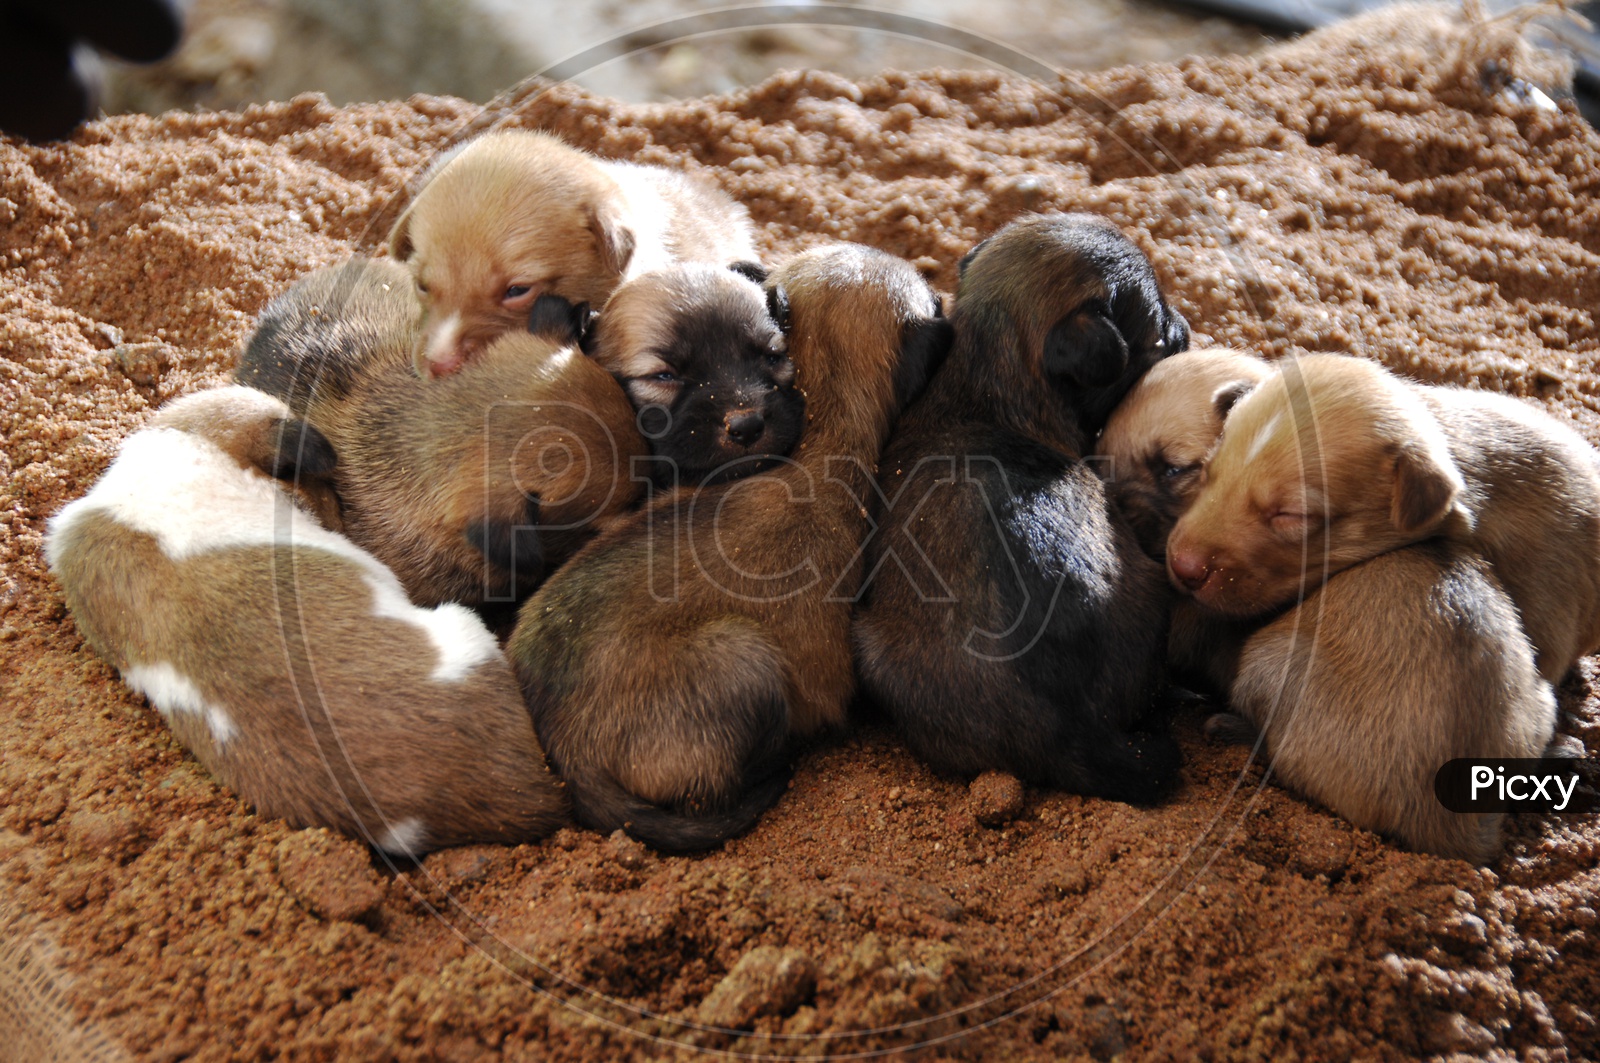 A litter of stray dog pups